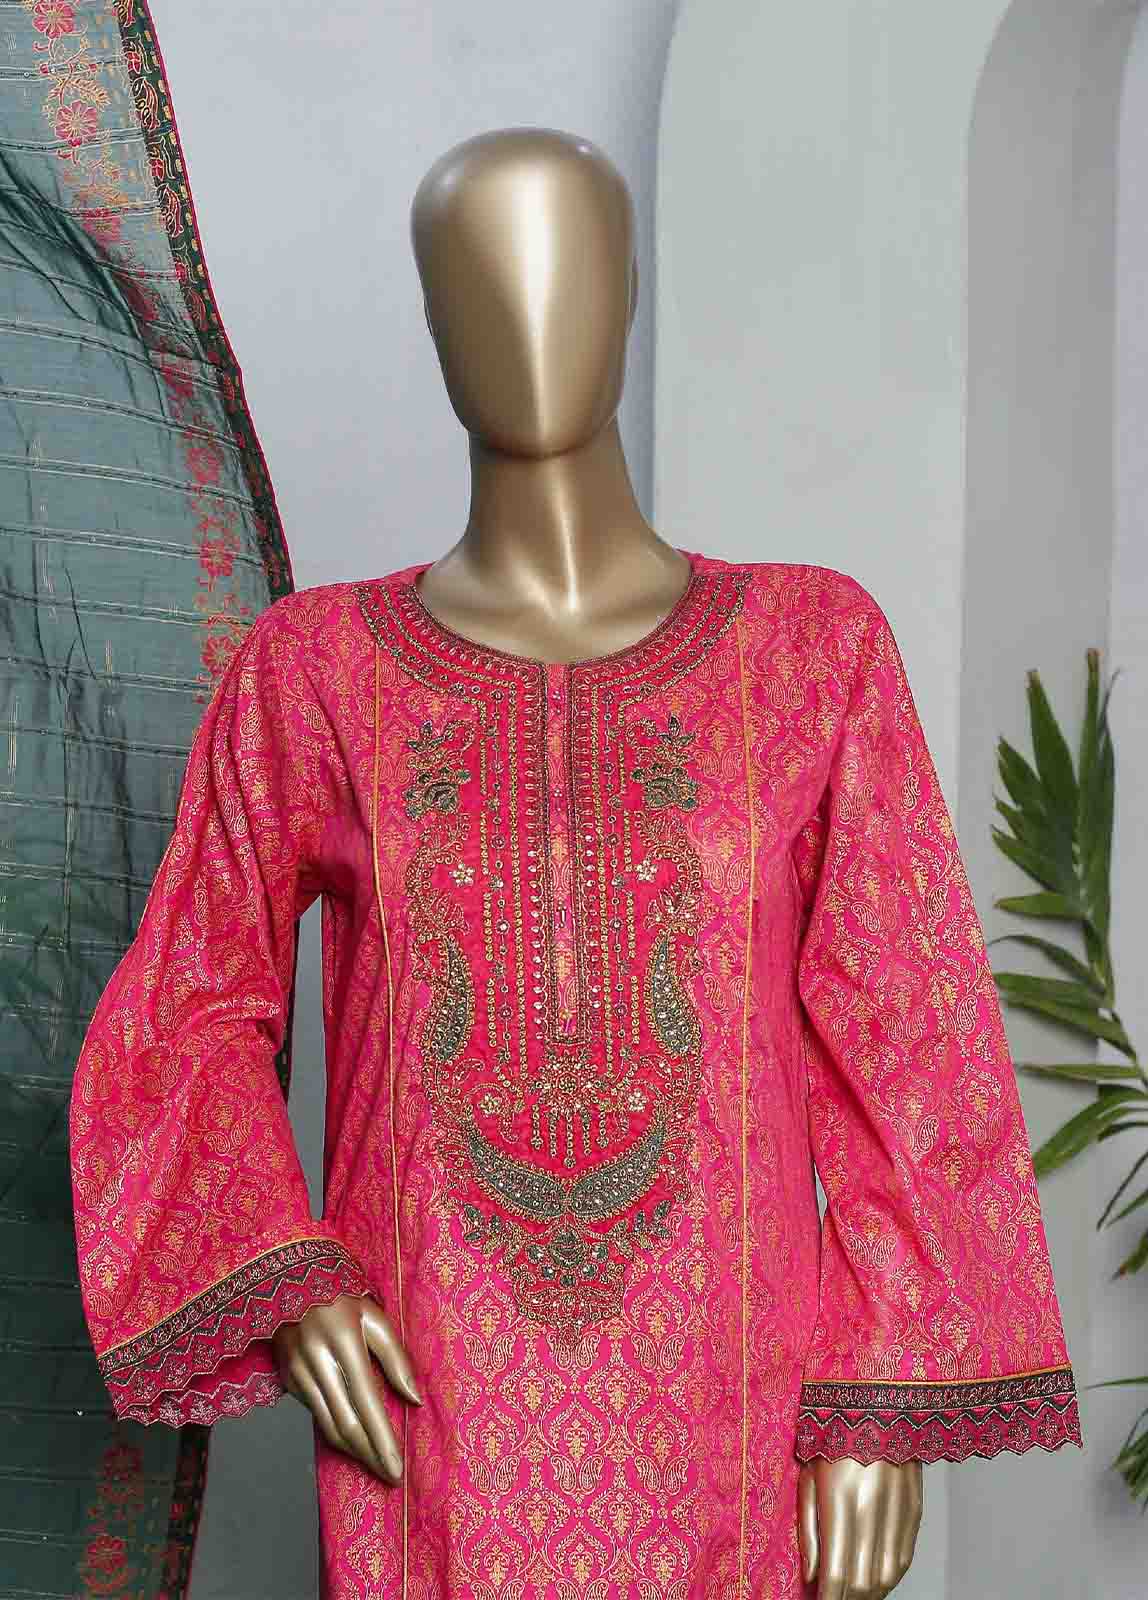 LRGE-0016- 3 Piece Block Print Embroidered Suit